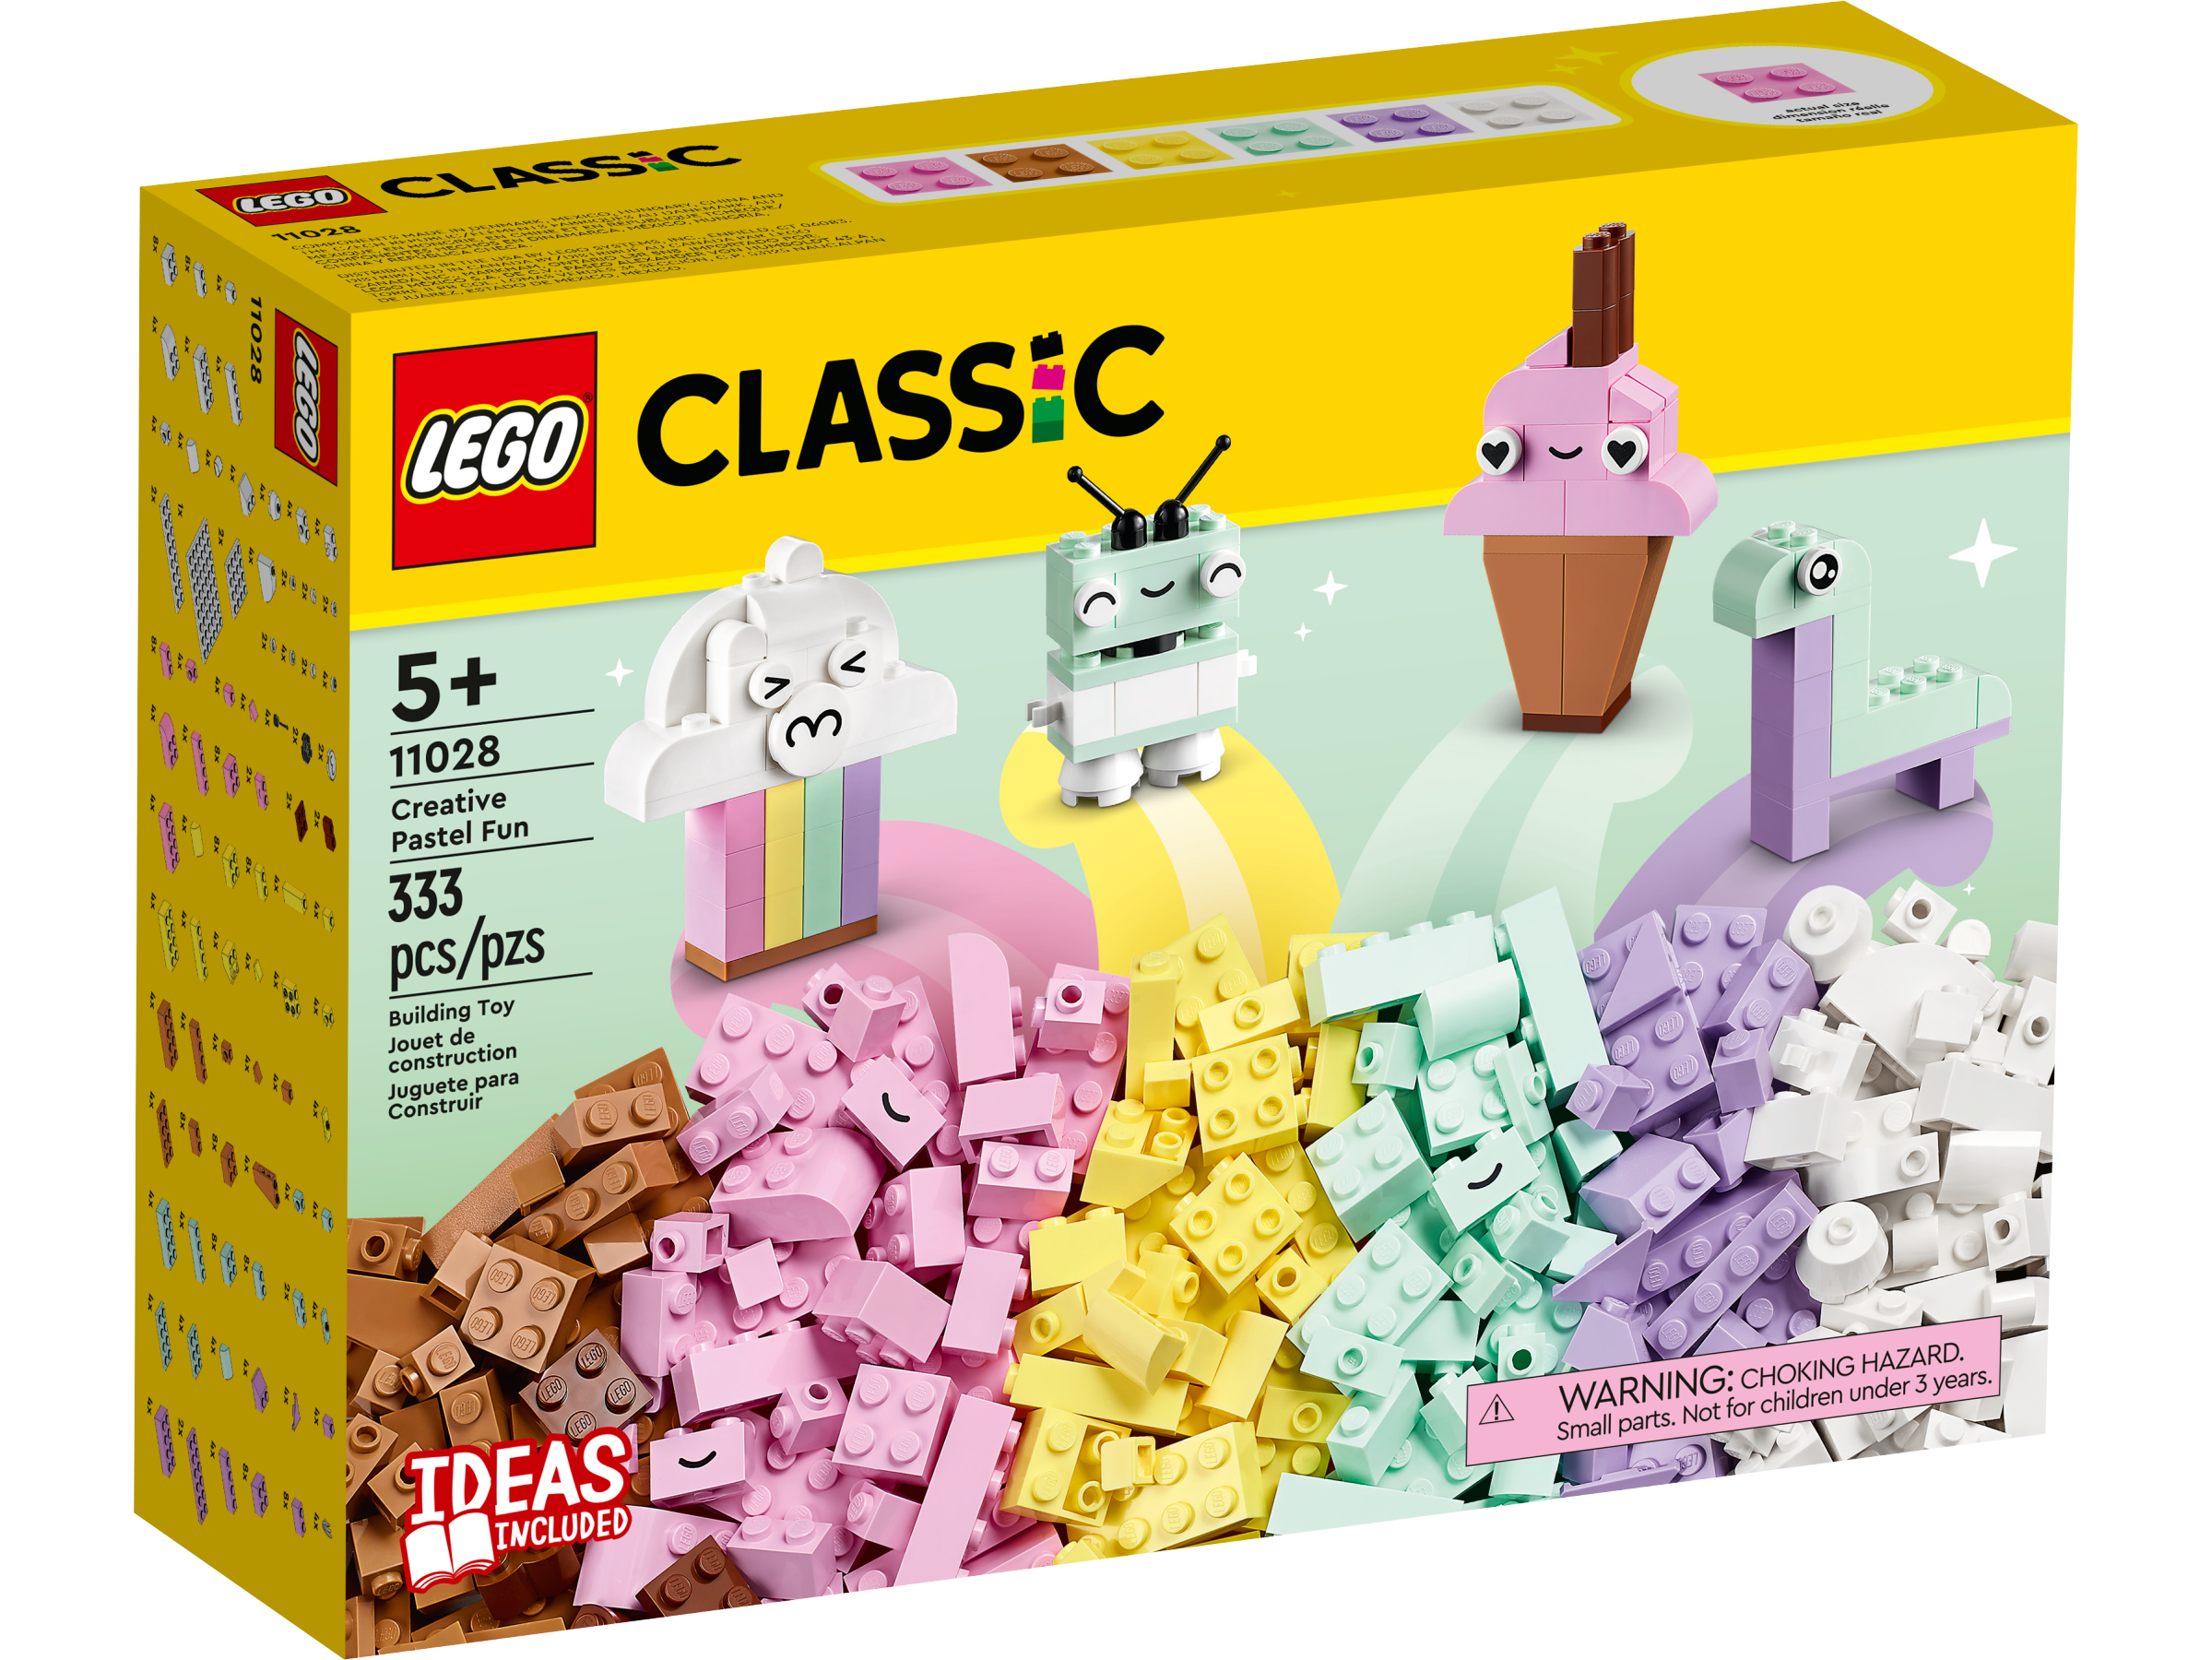 Creative Pastel Fun 11028 | Shop US the Classic | online Buy at LEGO® Official